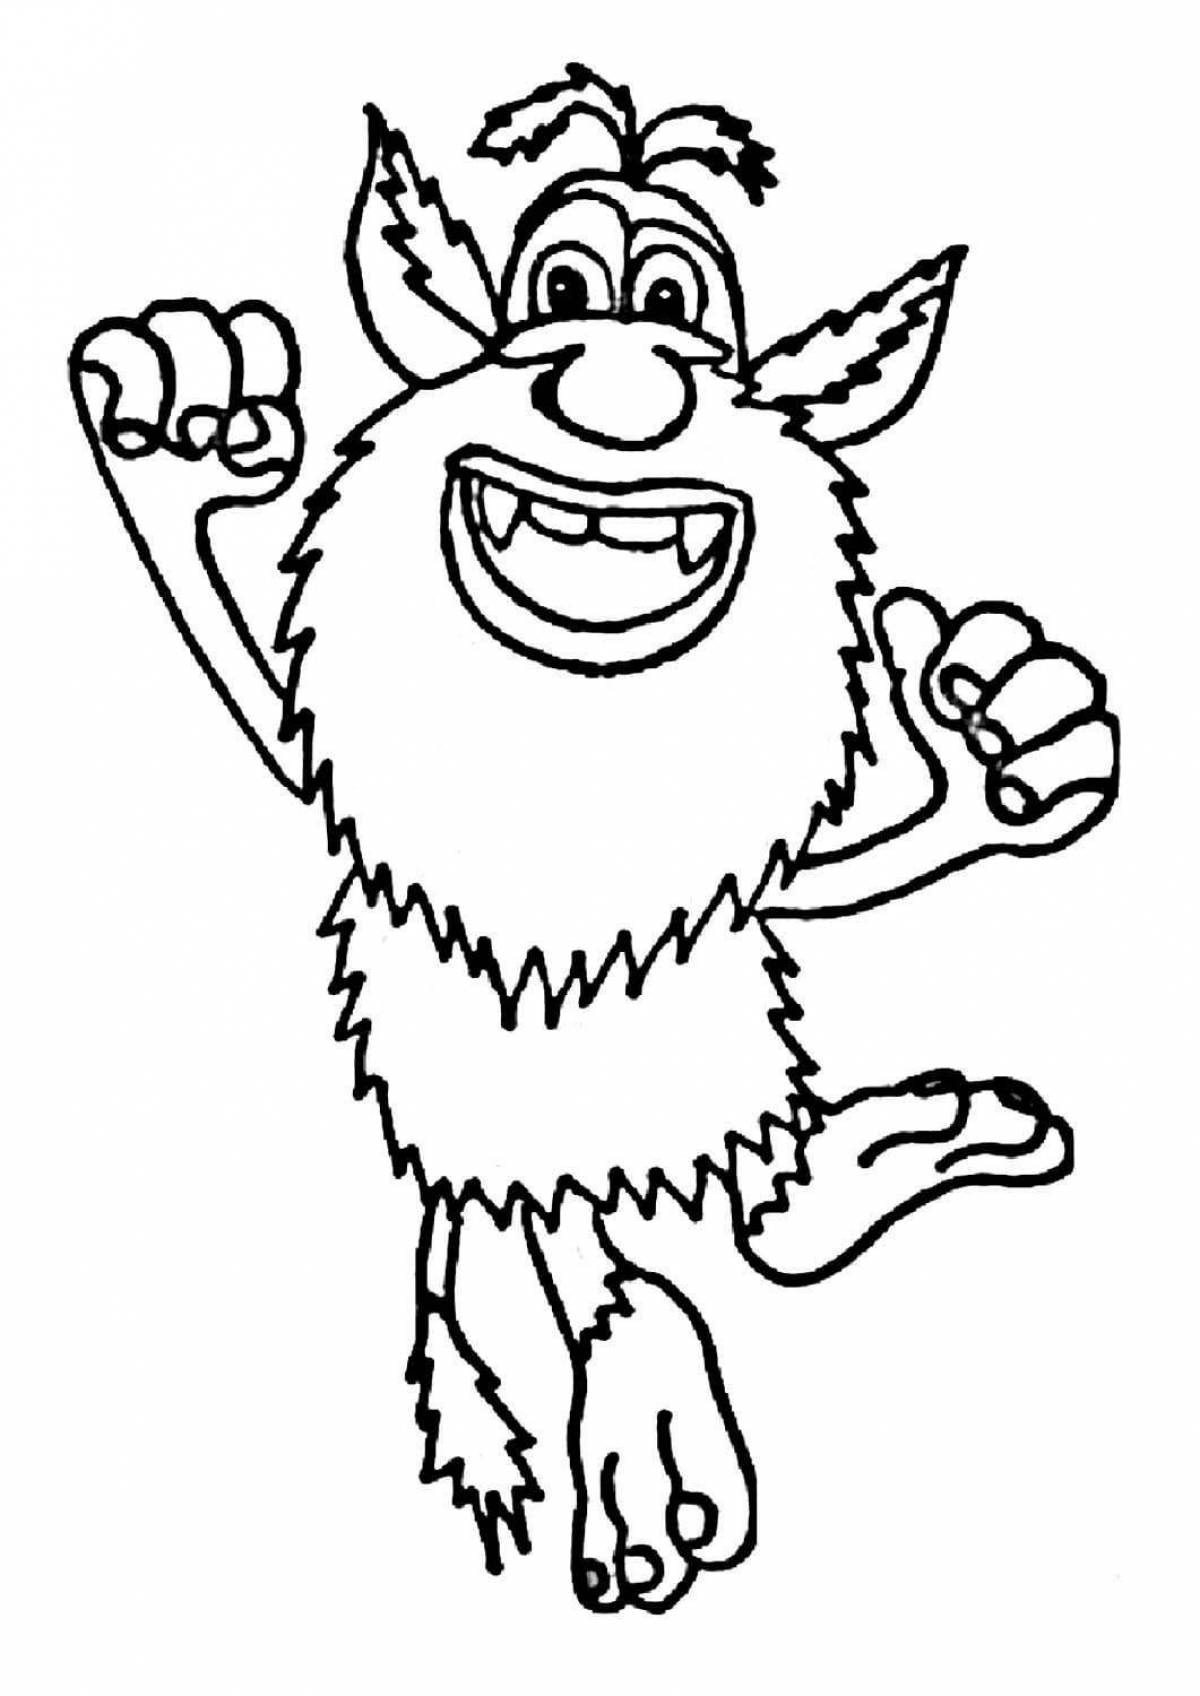 Funny buba coloring book for babies